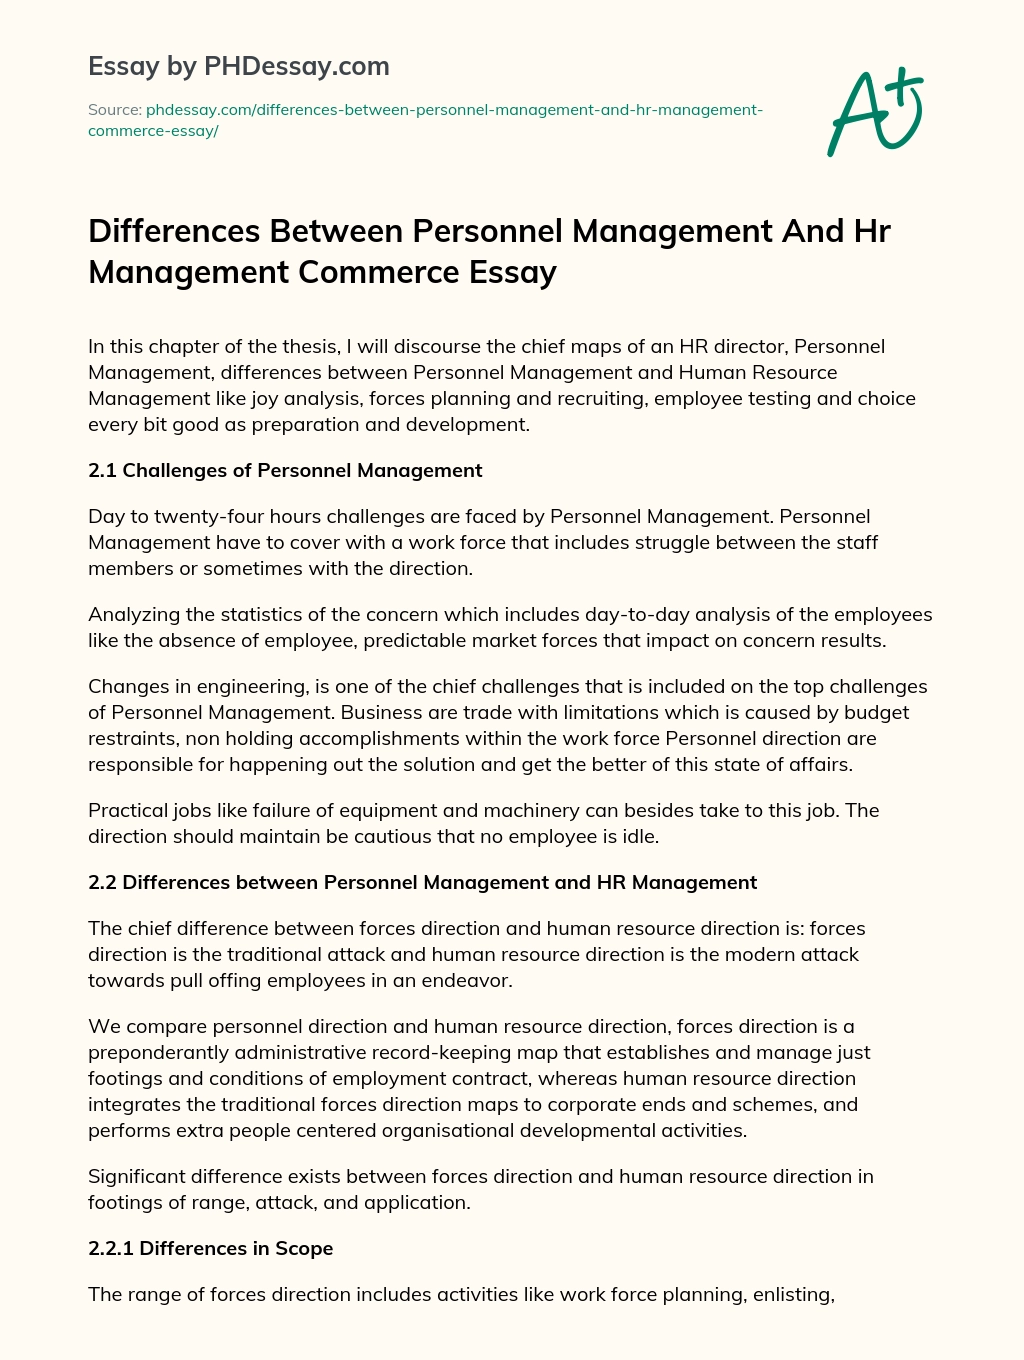 Differences Between Personnel Management and HR Management in Commerce essay